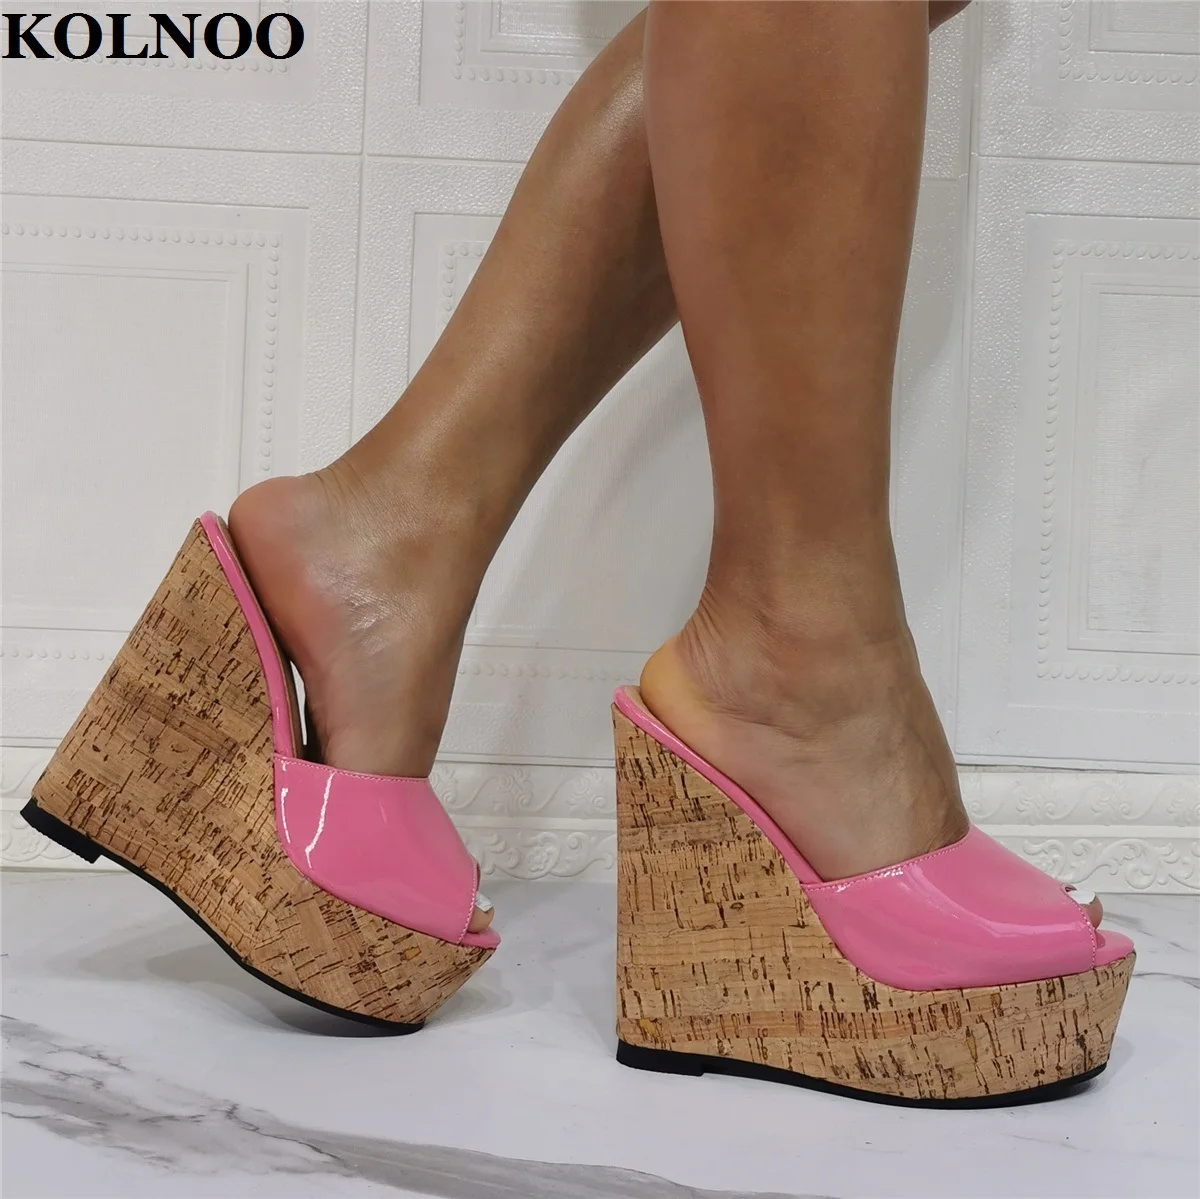 

KOLNOO New Arrival Handmade Womens Wedges Heel Slippers Peep-Toe Patent Leather Sandals Real Photos Sexy Evening Fashion Shoes